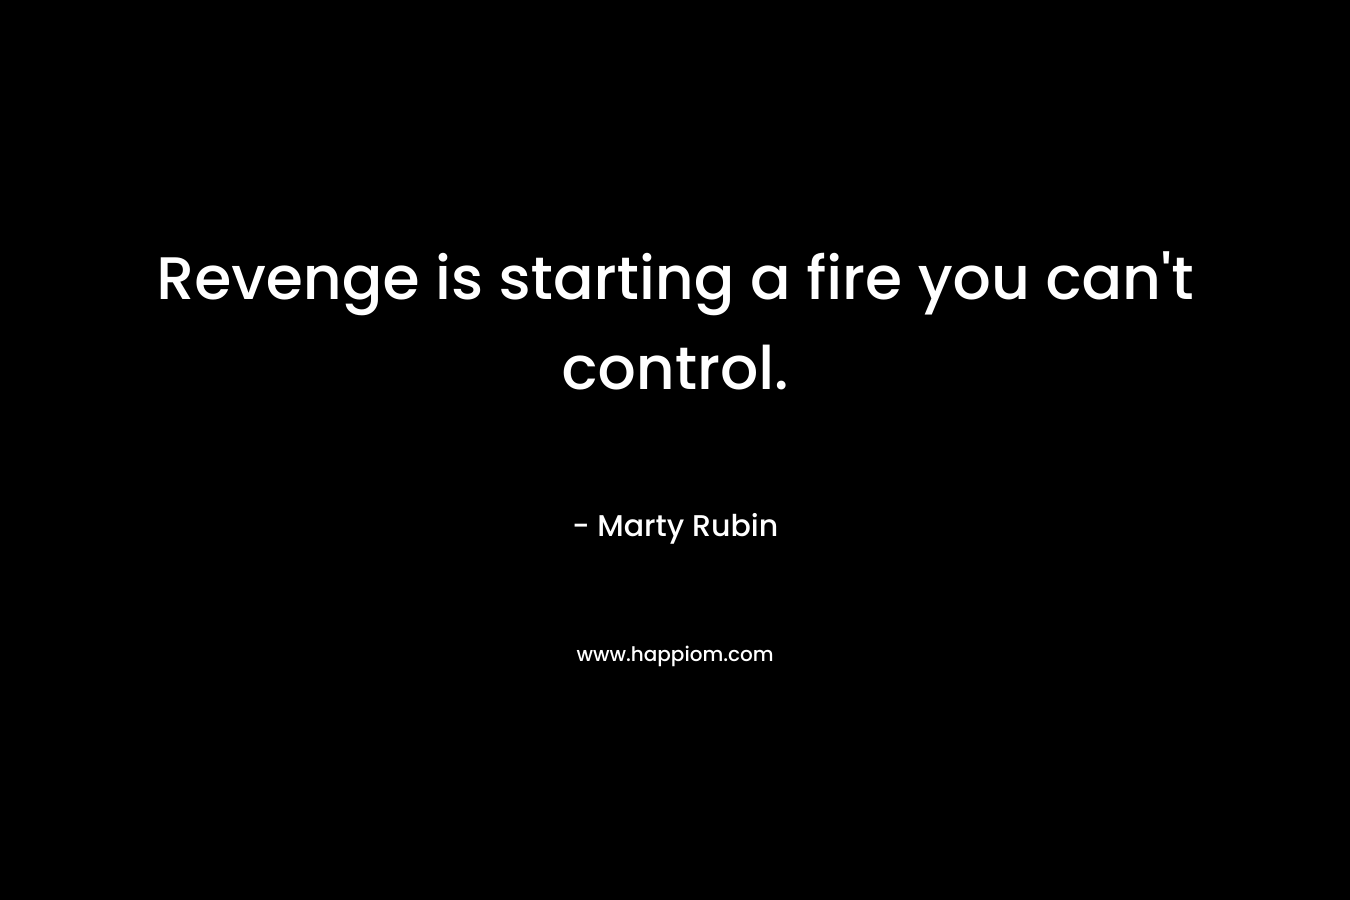 Revenge is starting a fire you can’t control. – Marty Rubin